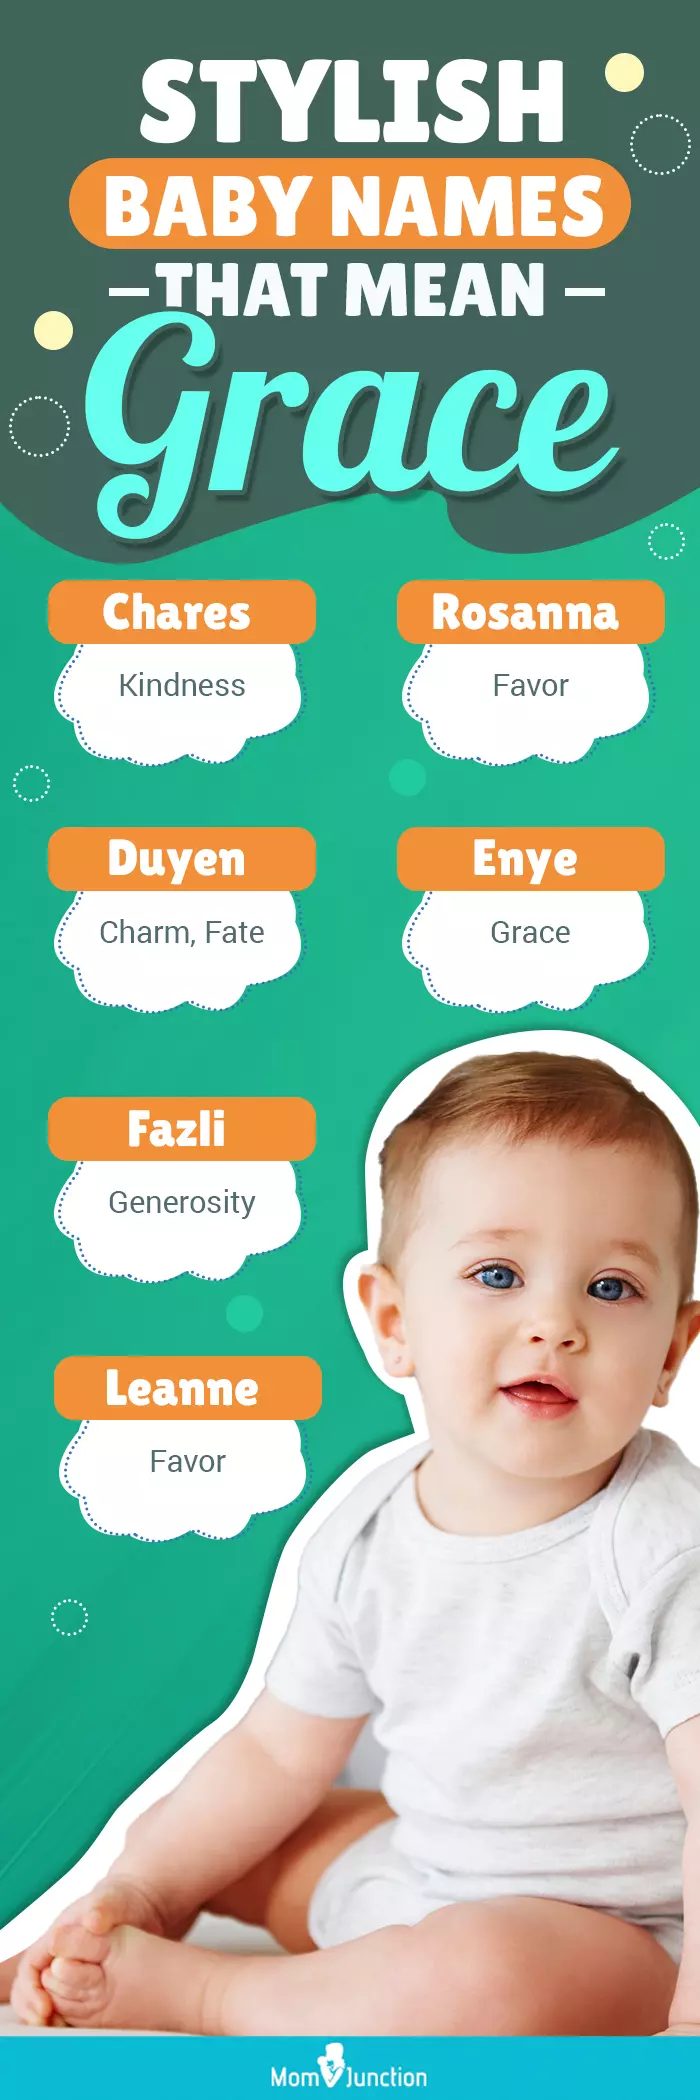 stylish baby names that mean grace (infographic)